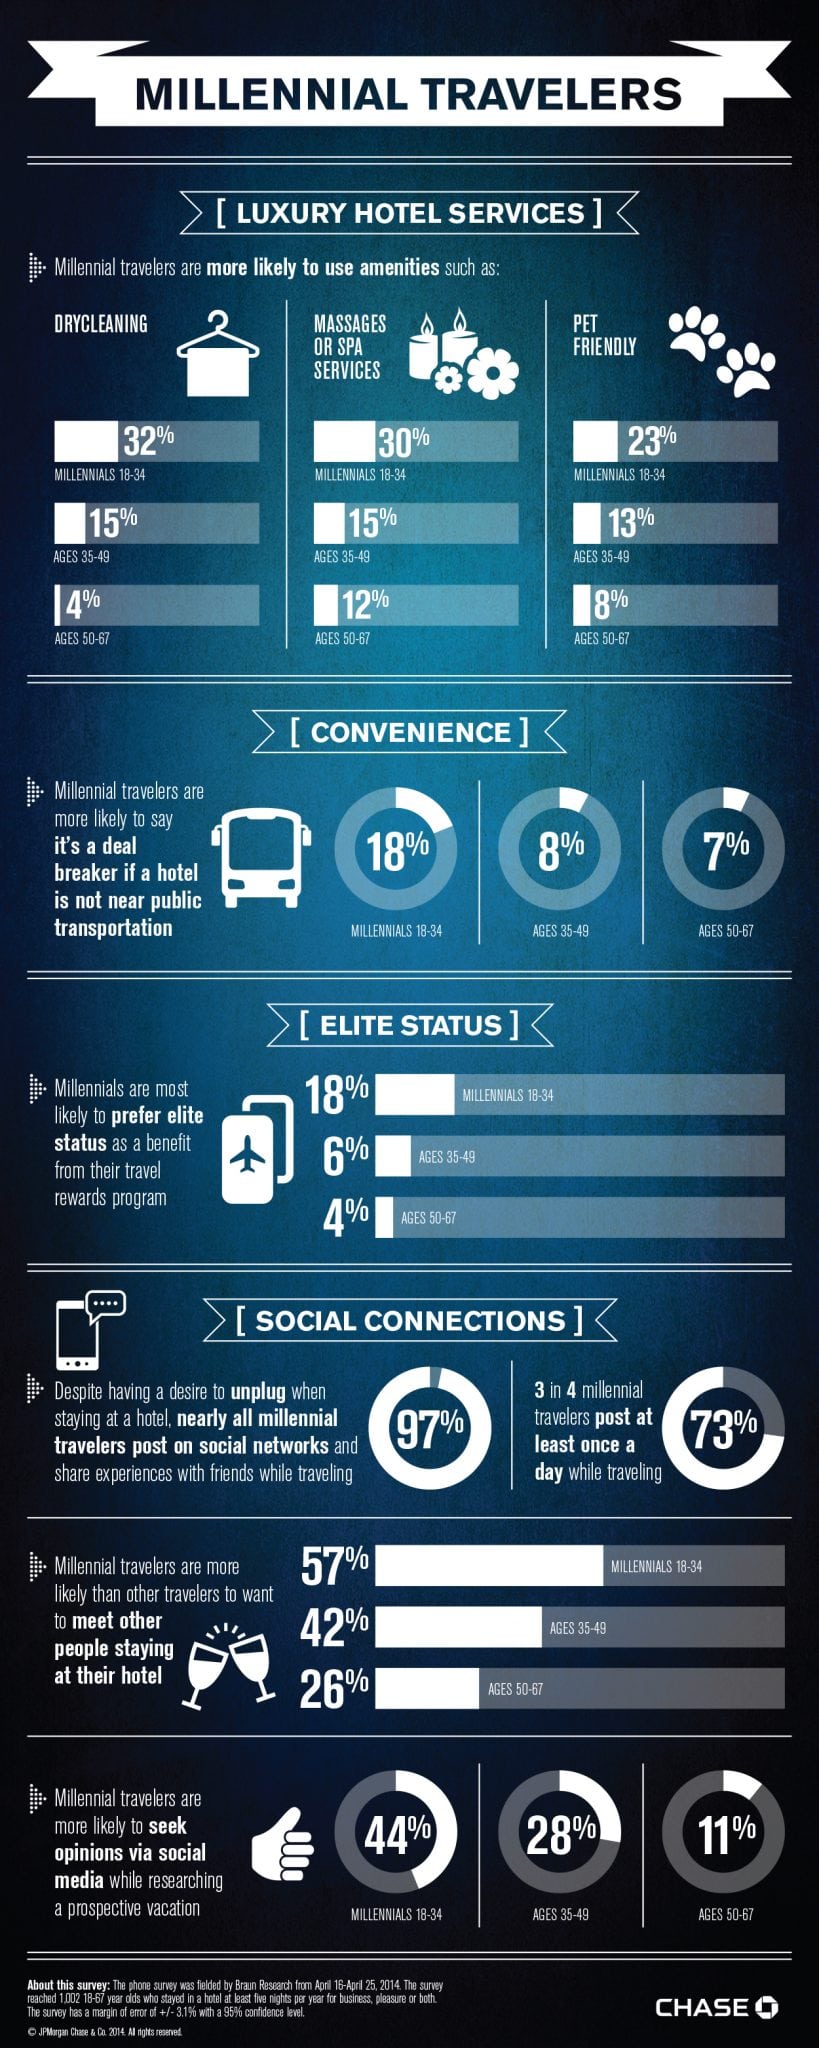 Chase Millennial Traveler Infographic FINAL ©